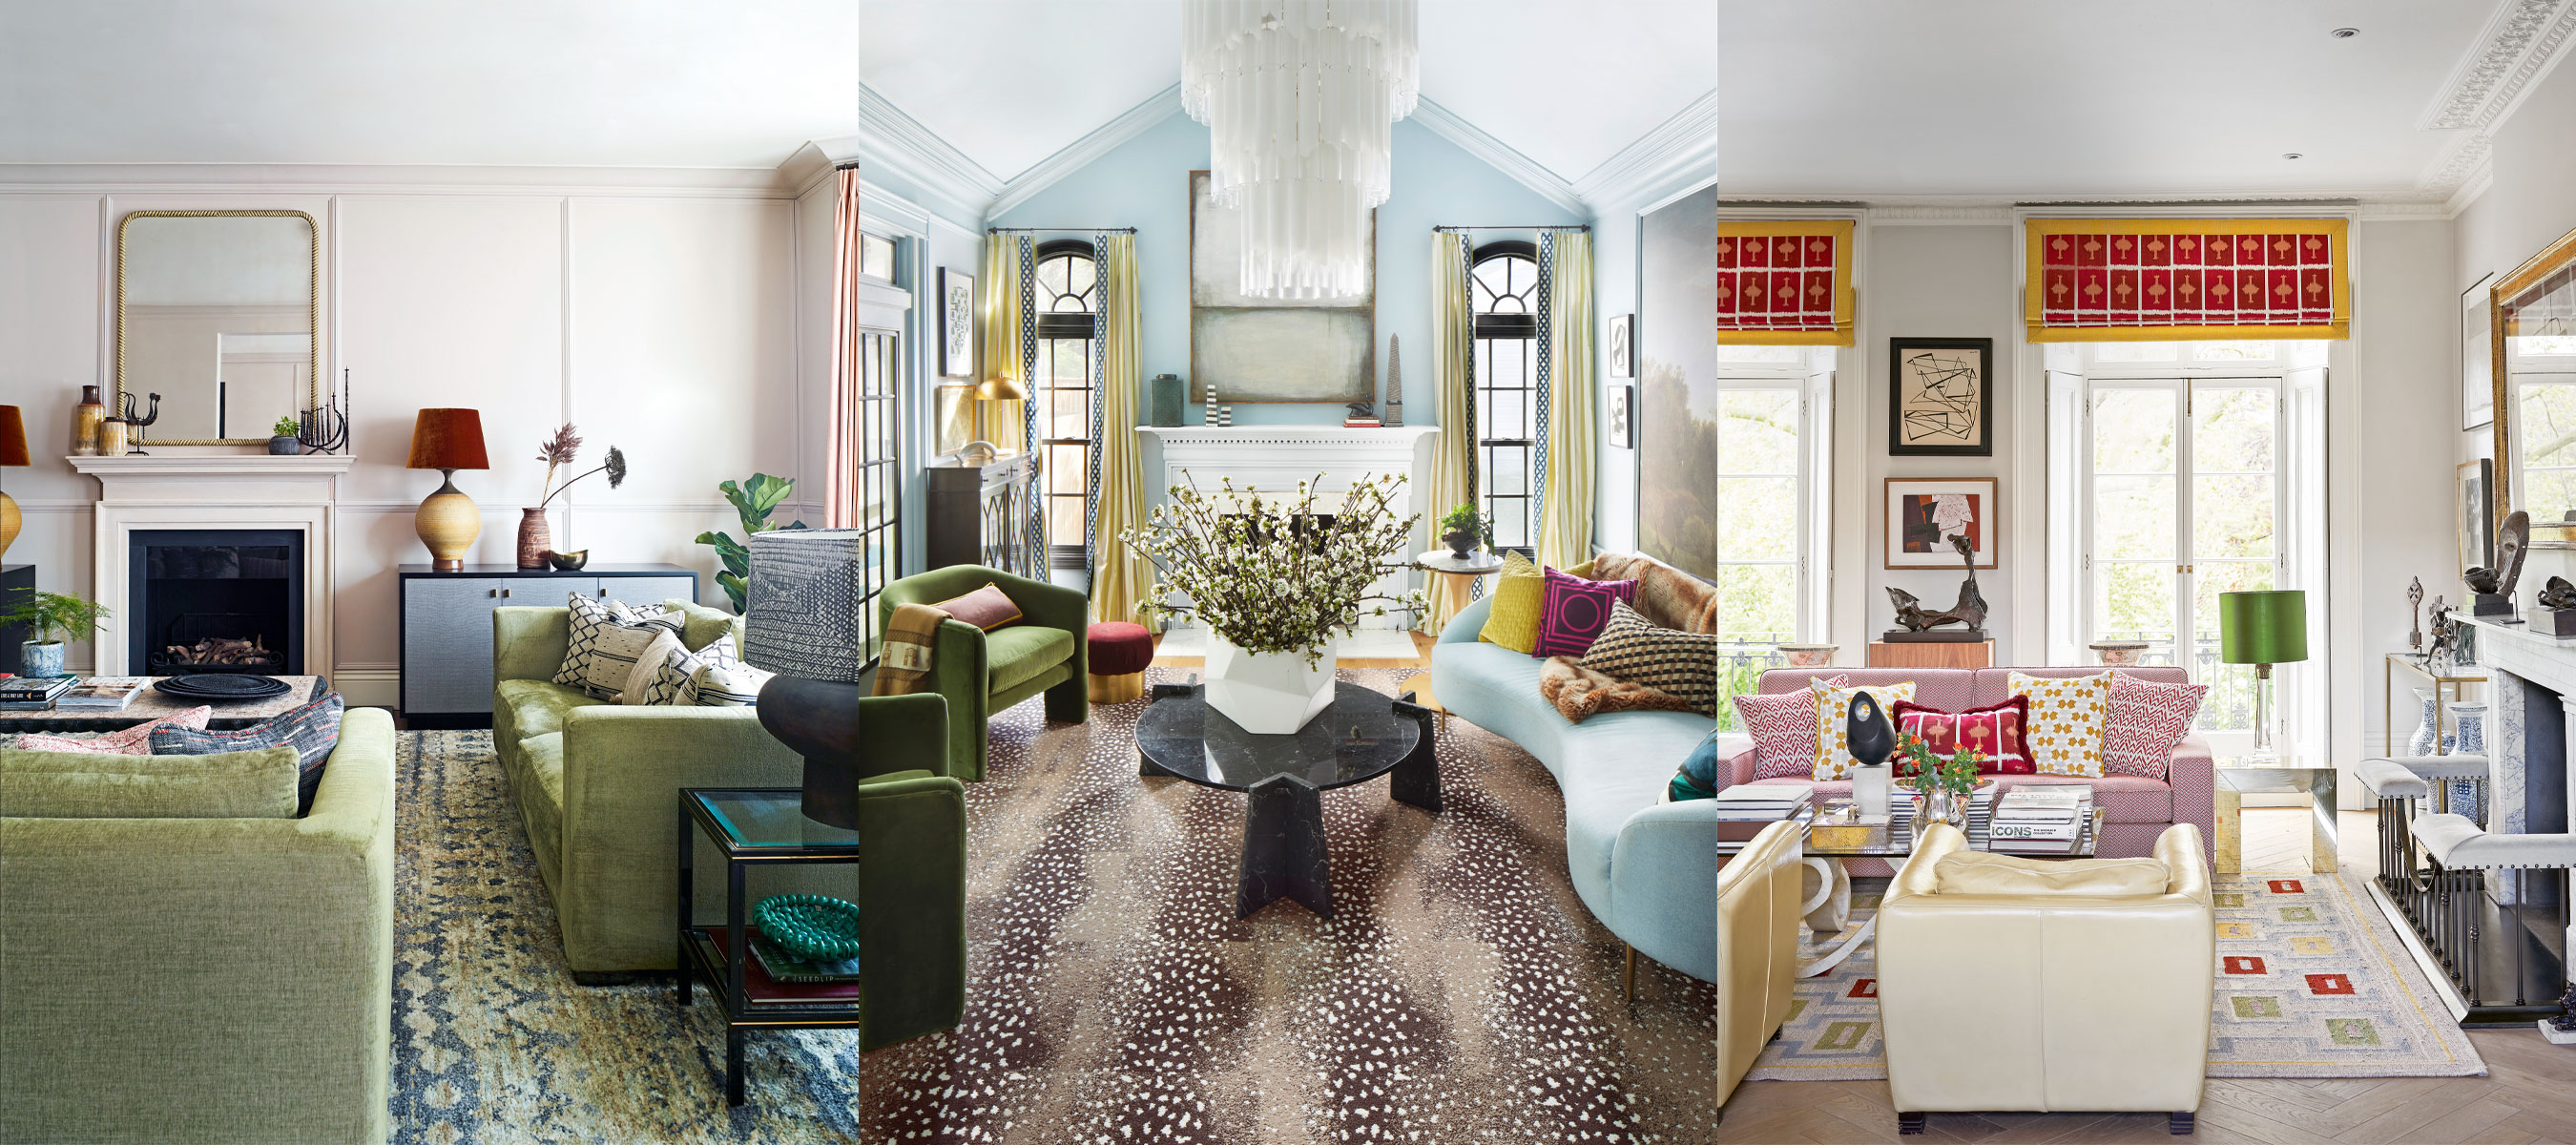 Does a living room need a rug? We ask the experts